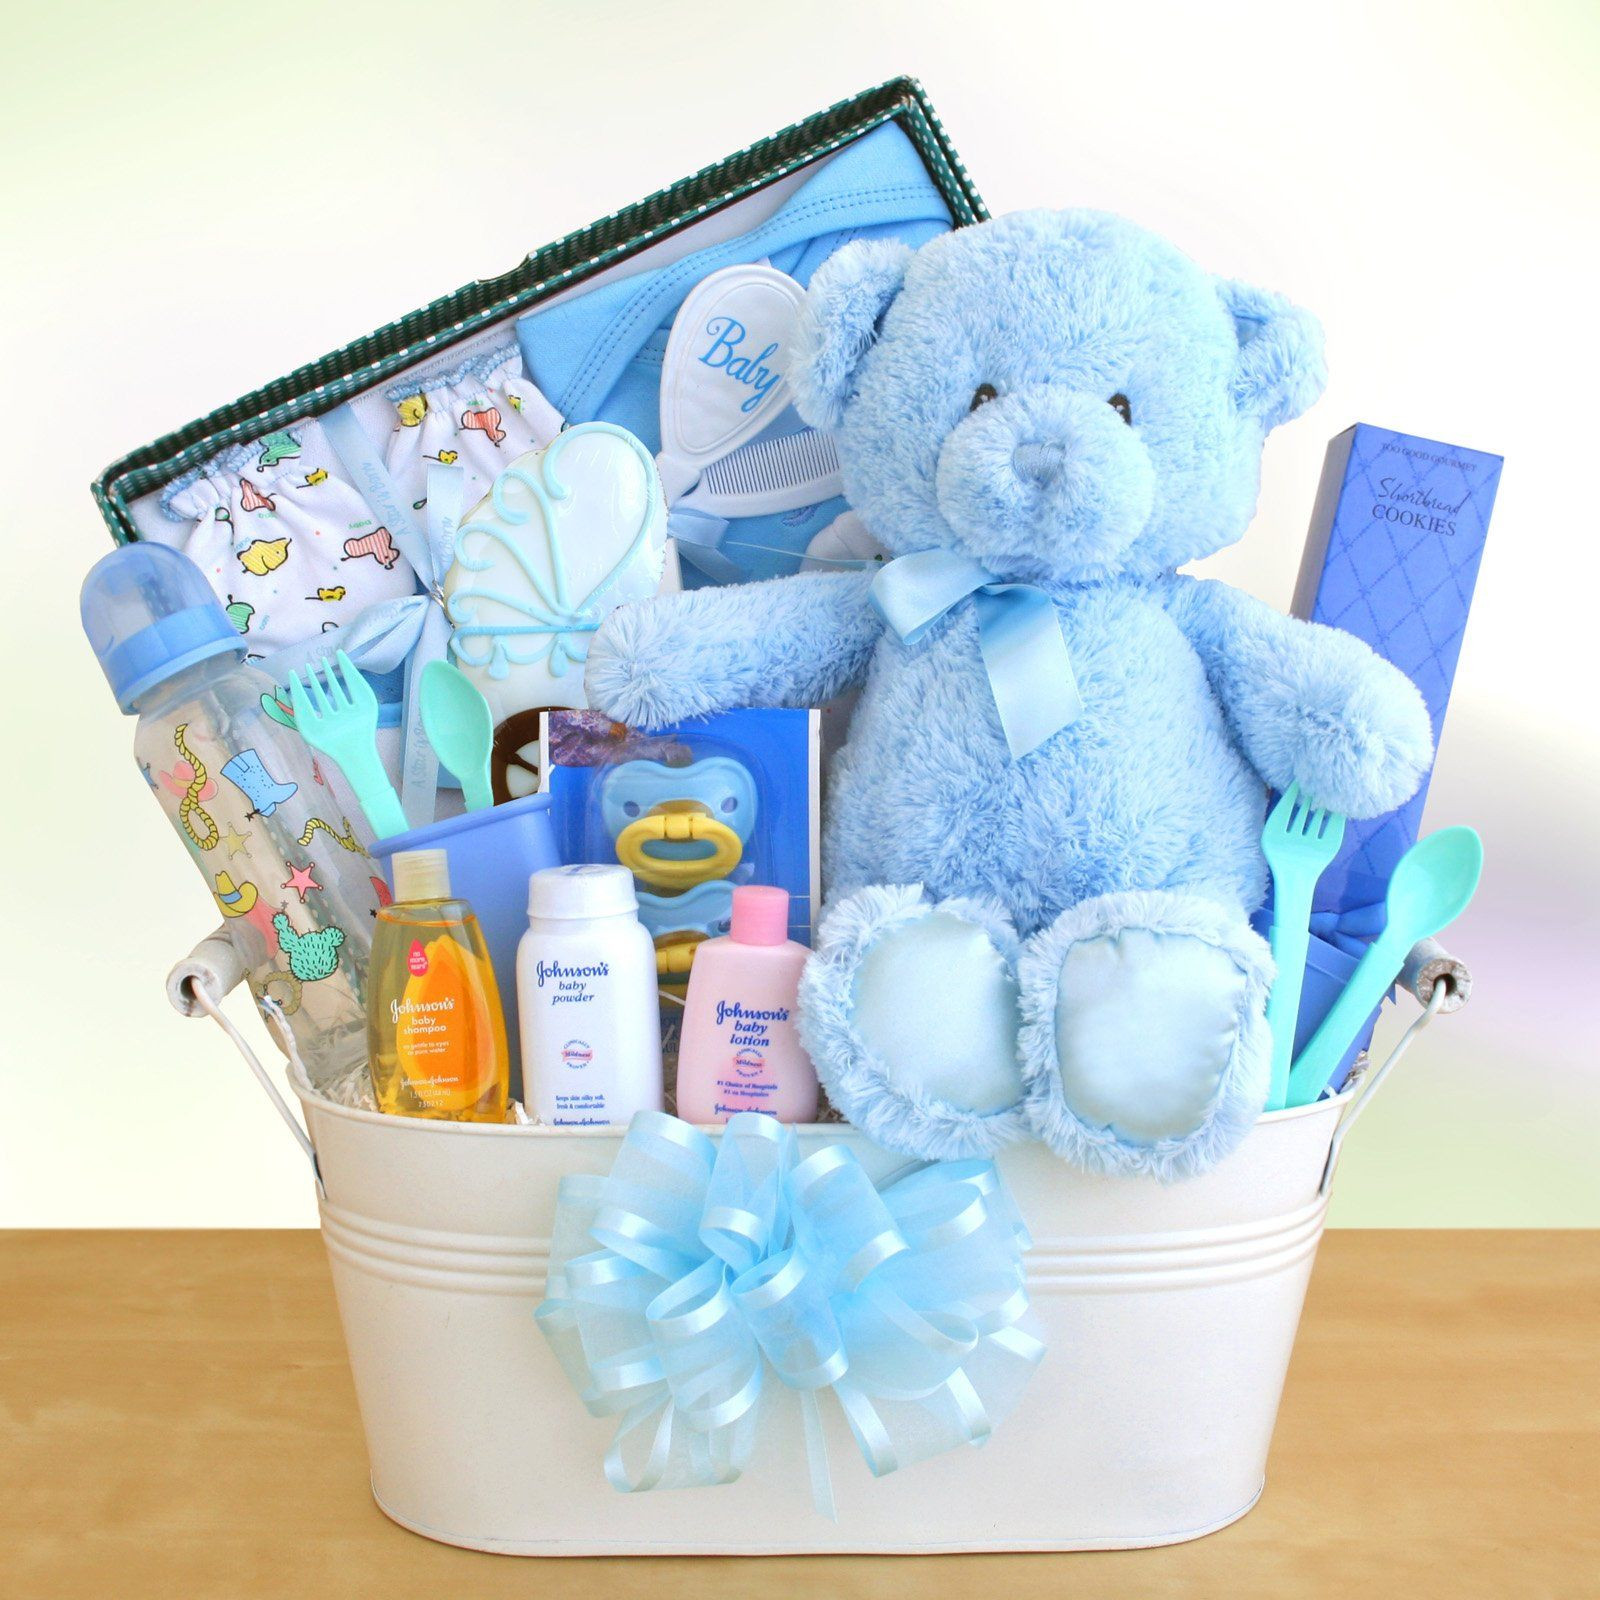 Cute Baby Shower Gift Ideas For Boys
 Have to have it New Arrival Baby Boy Gift Basket $78 99